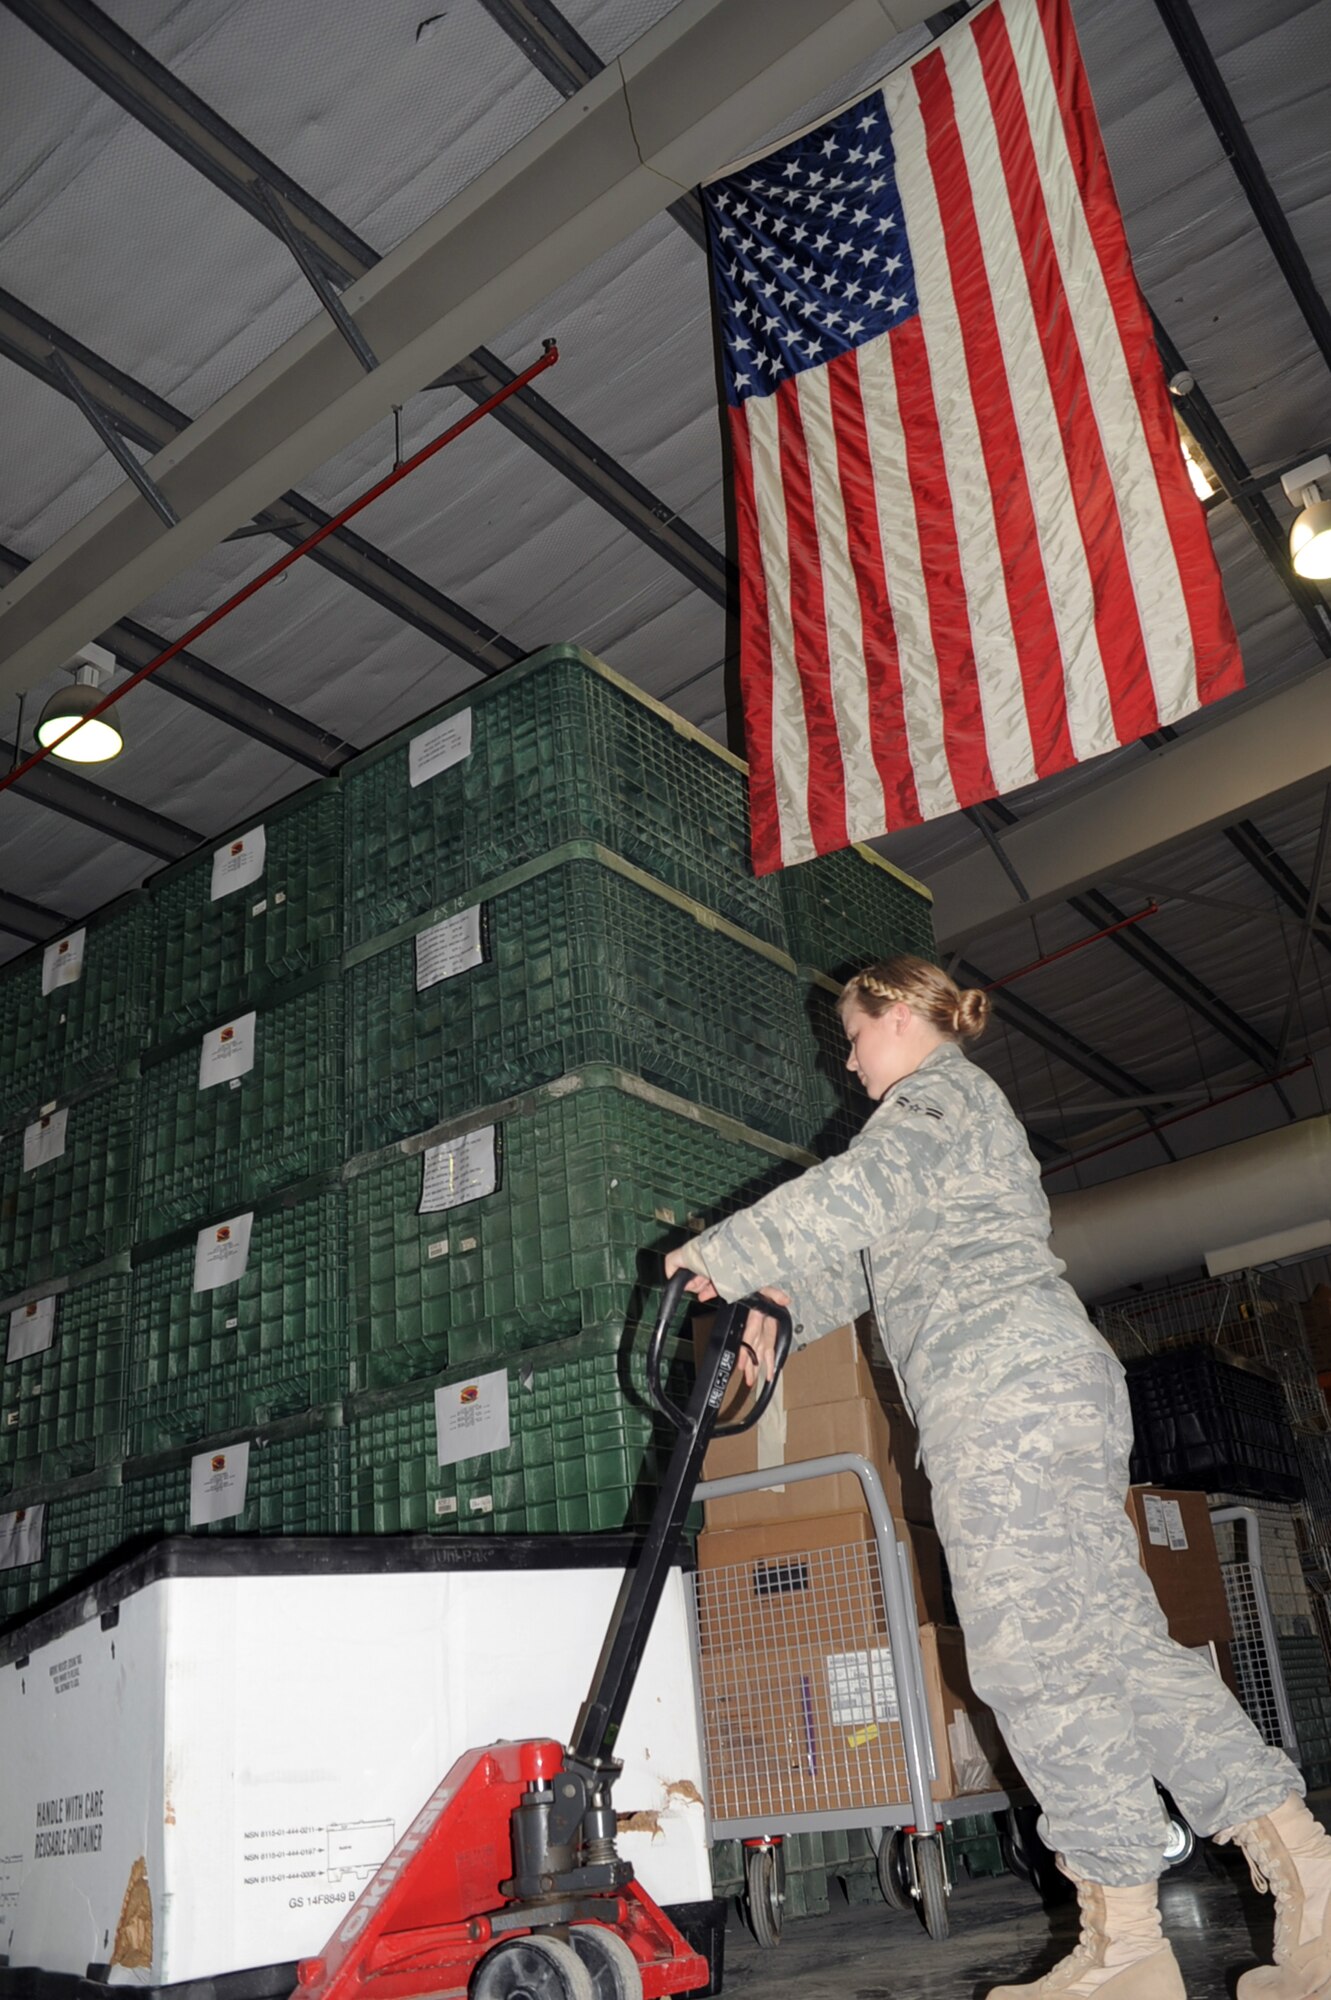 Airman 1st Class Te'Anna R. Drake, a traffic management journeyman with the 380th Expeditionary Logistics Readiness Squadron, moves some cargo into place at her unit's warehouse at an non-disclosed location in Southwest Asia on Jan. 15, 2009.  In her deployed work, Airman Drake packs and ships out official priority shipments to all other bases in the U.S. as well as the deployed area of responsibility. She is deployed from the 60th Aerial Port Squadron at Travis Air Force Base, Calif., and her hometown is Roy, Wash.  (U.S. Air Force Photo/Tech. Sgt. Scott T. Sturkol/Released)